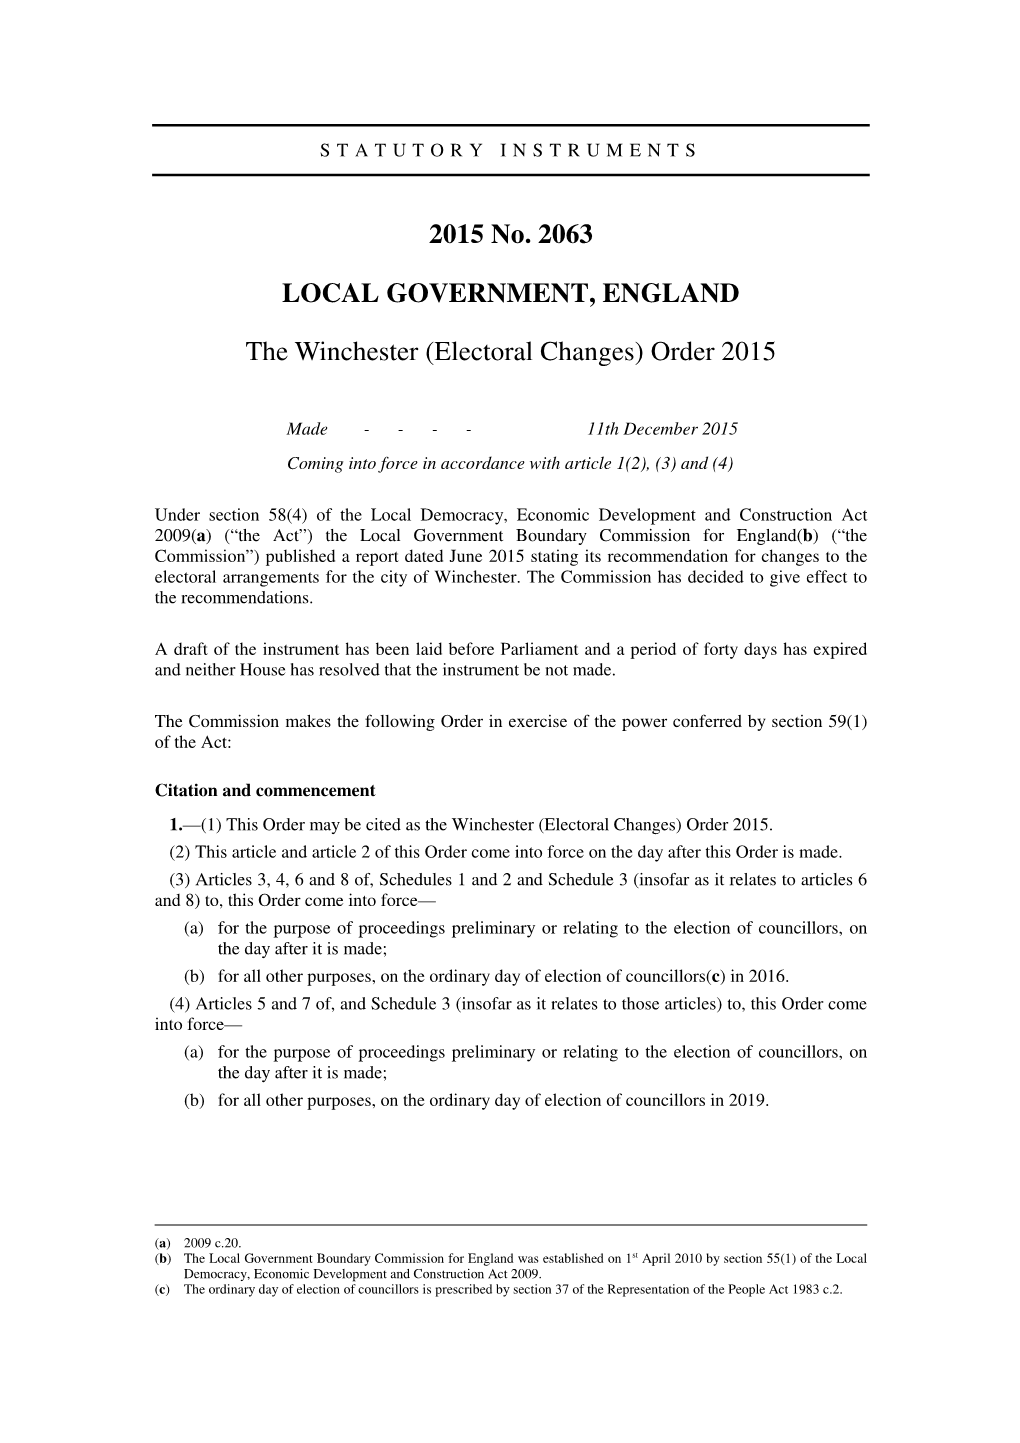 The Winchester (Electoral Changes) Order 2015